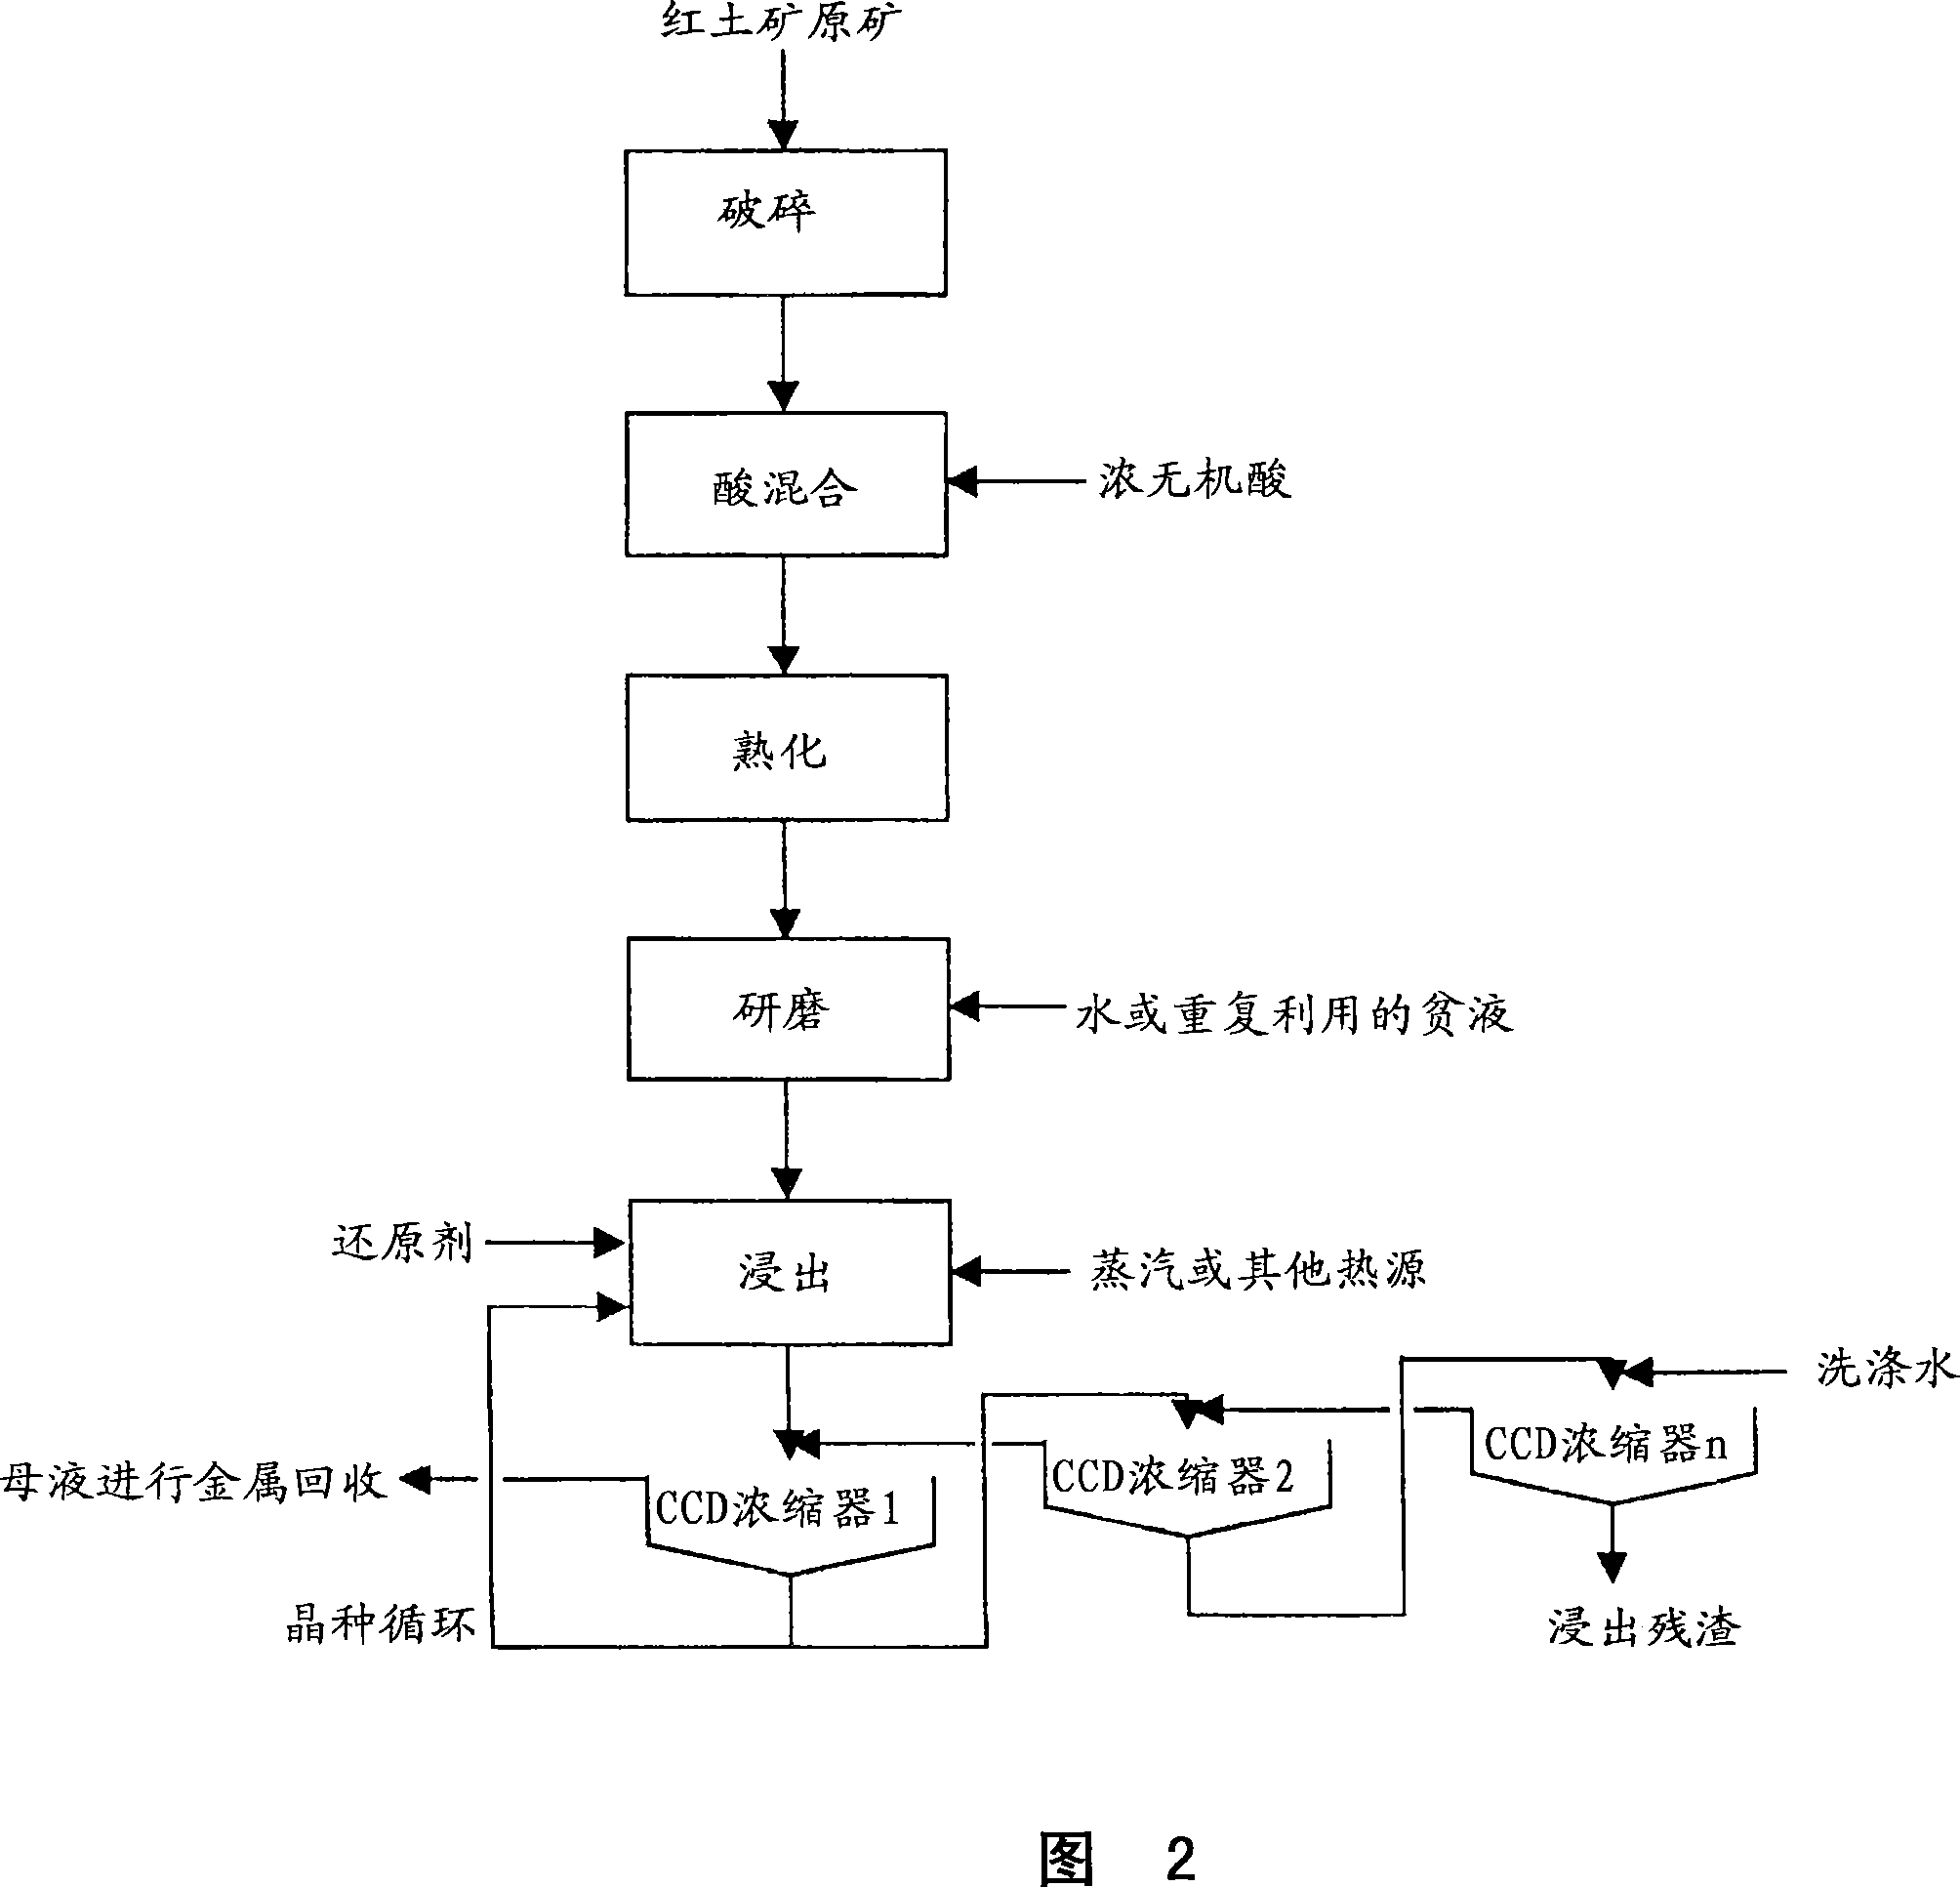 Method for nickel and cobalt recovery from laterite ores by reaction with concentrated acid and water leaching